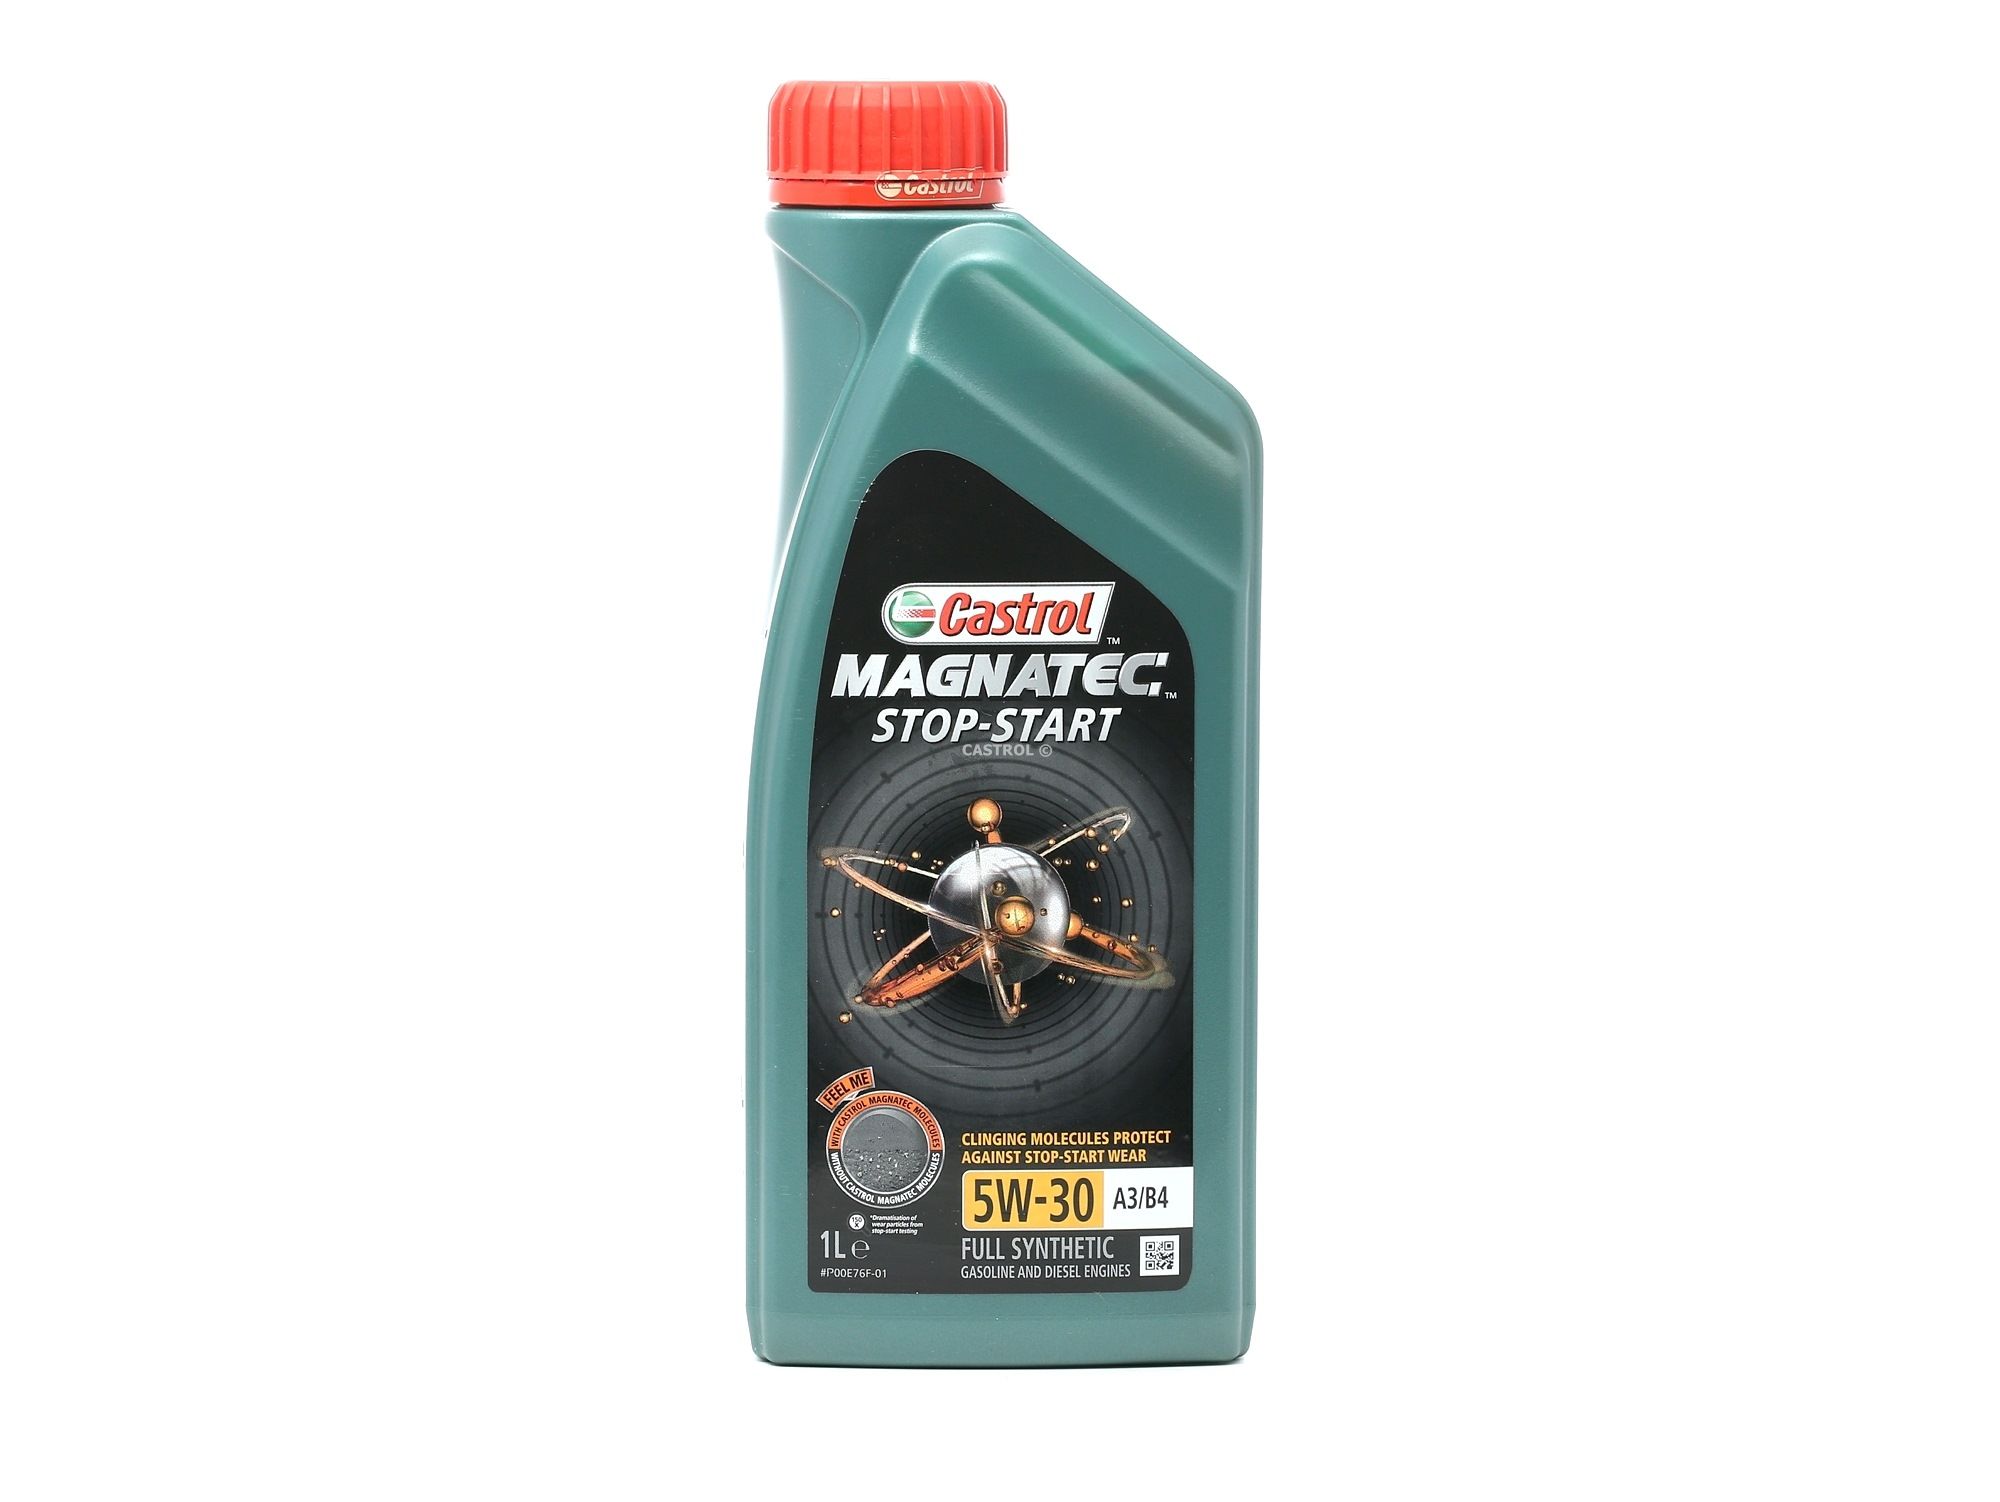 Aceite motor coche MB 229.5 CASTROL - 159C13 Magnatec, Stop-Start A3/B4